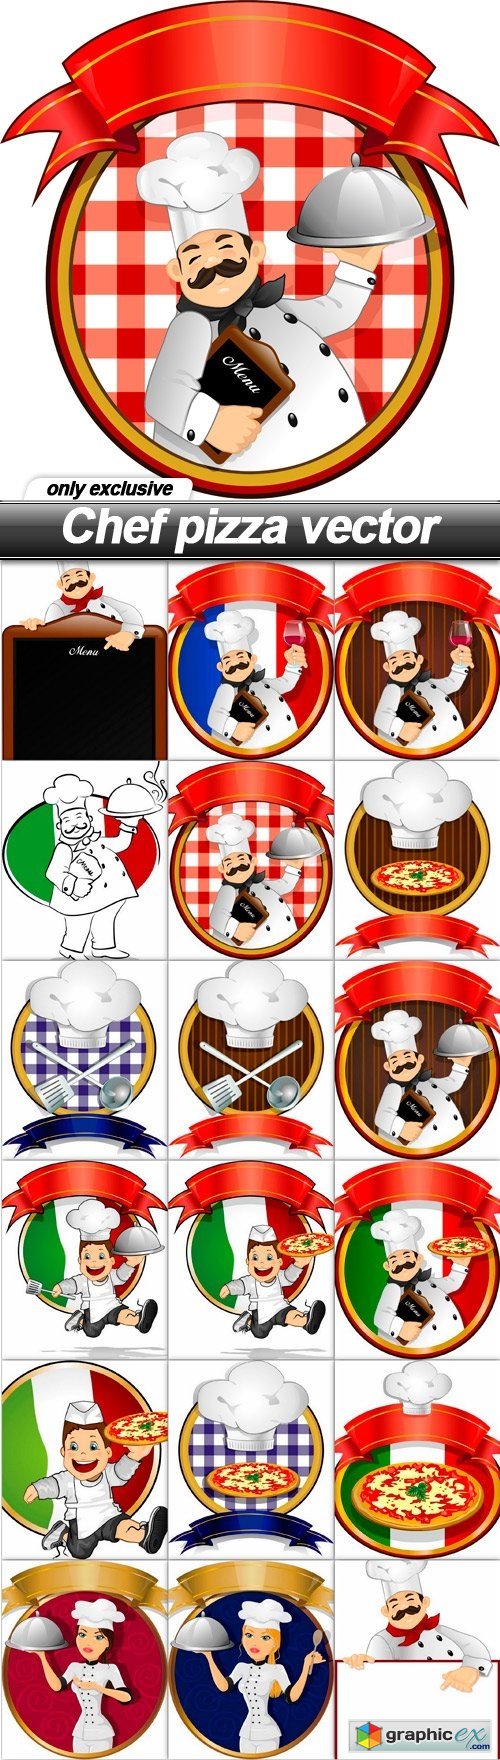 Chef pizza vector - 18 EPS